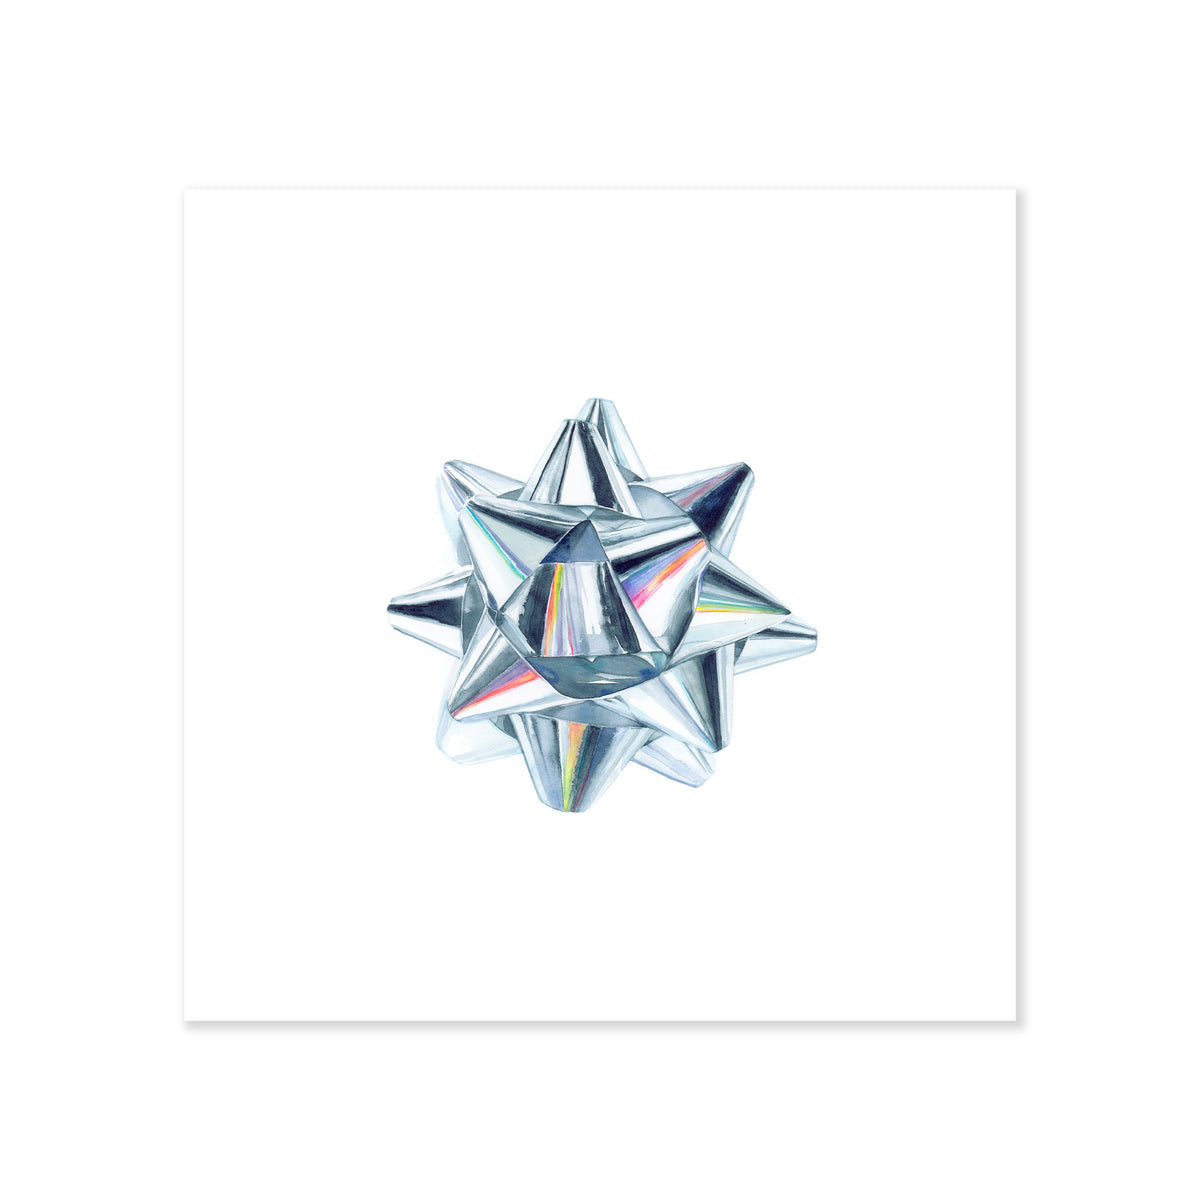 A fine art print illustrating a metallic silver star bow with iridescent reflects painted with watercolor on a soft white background